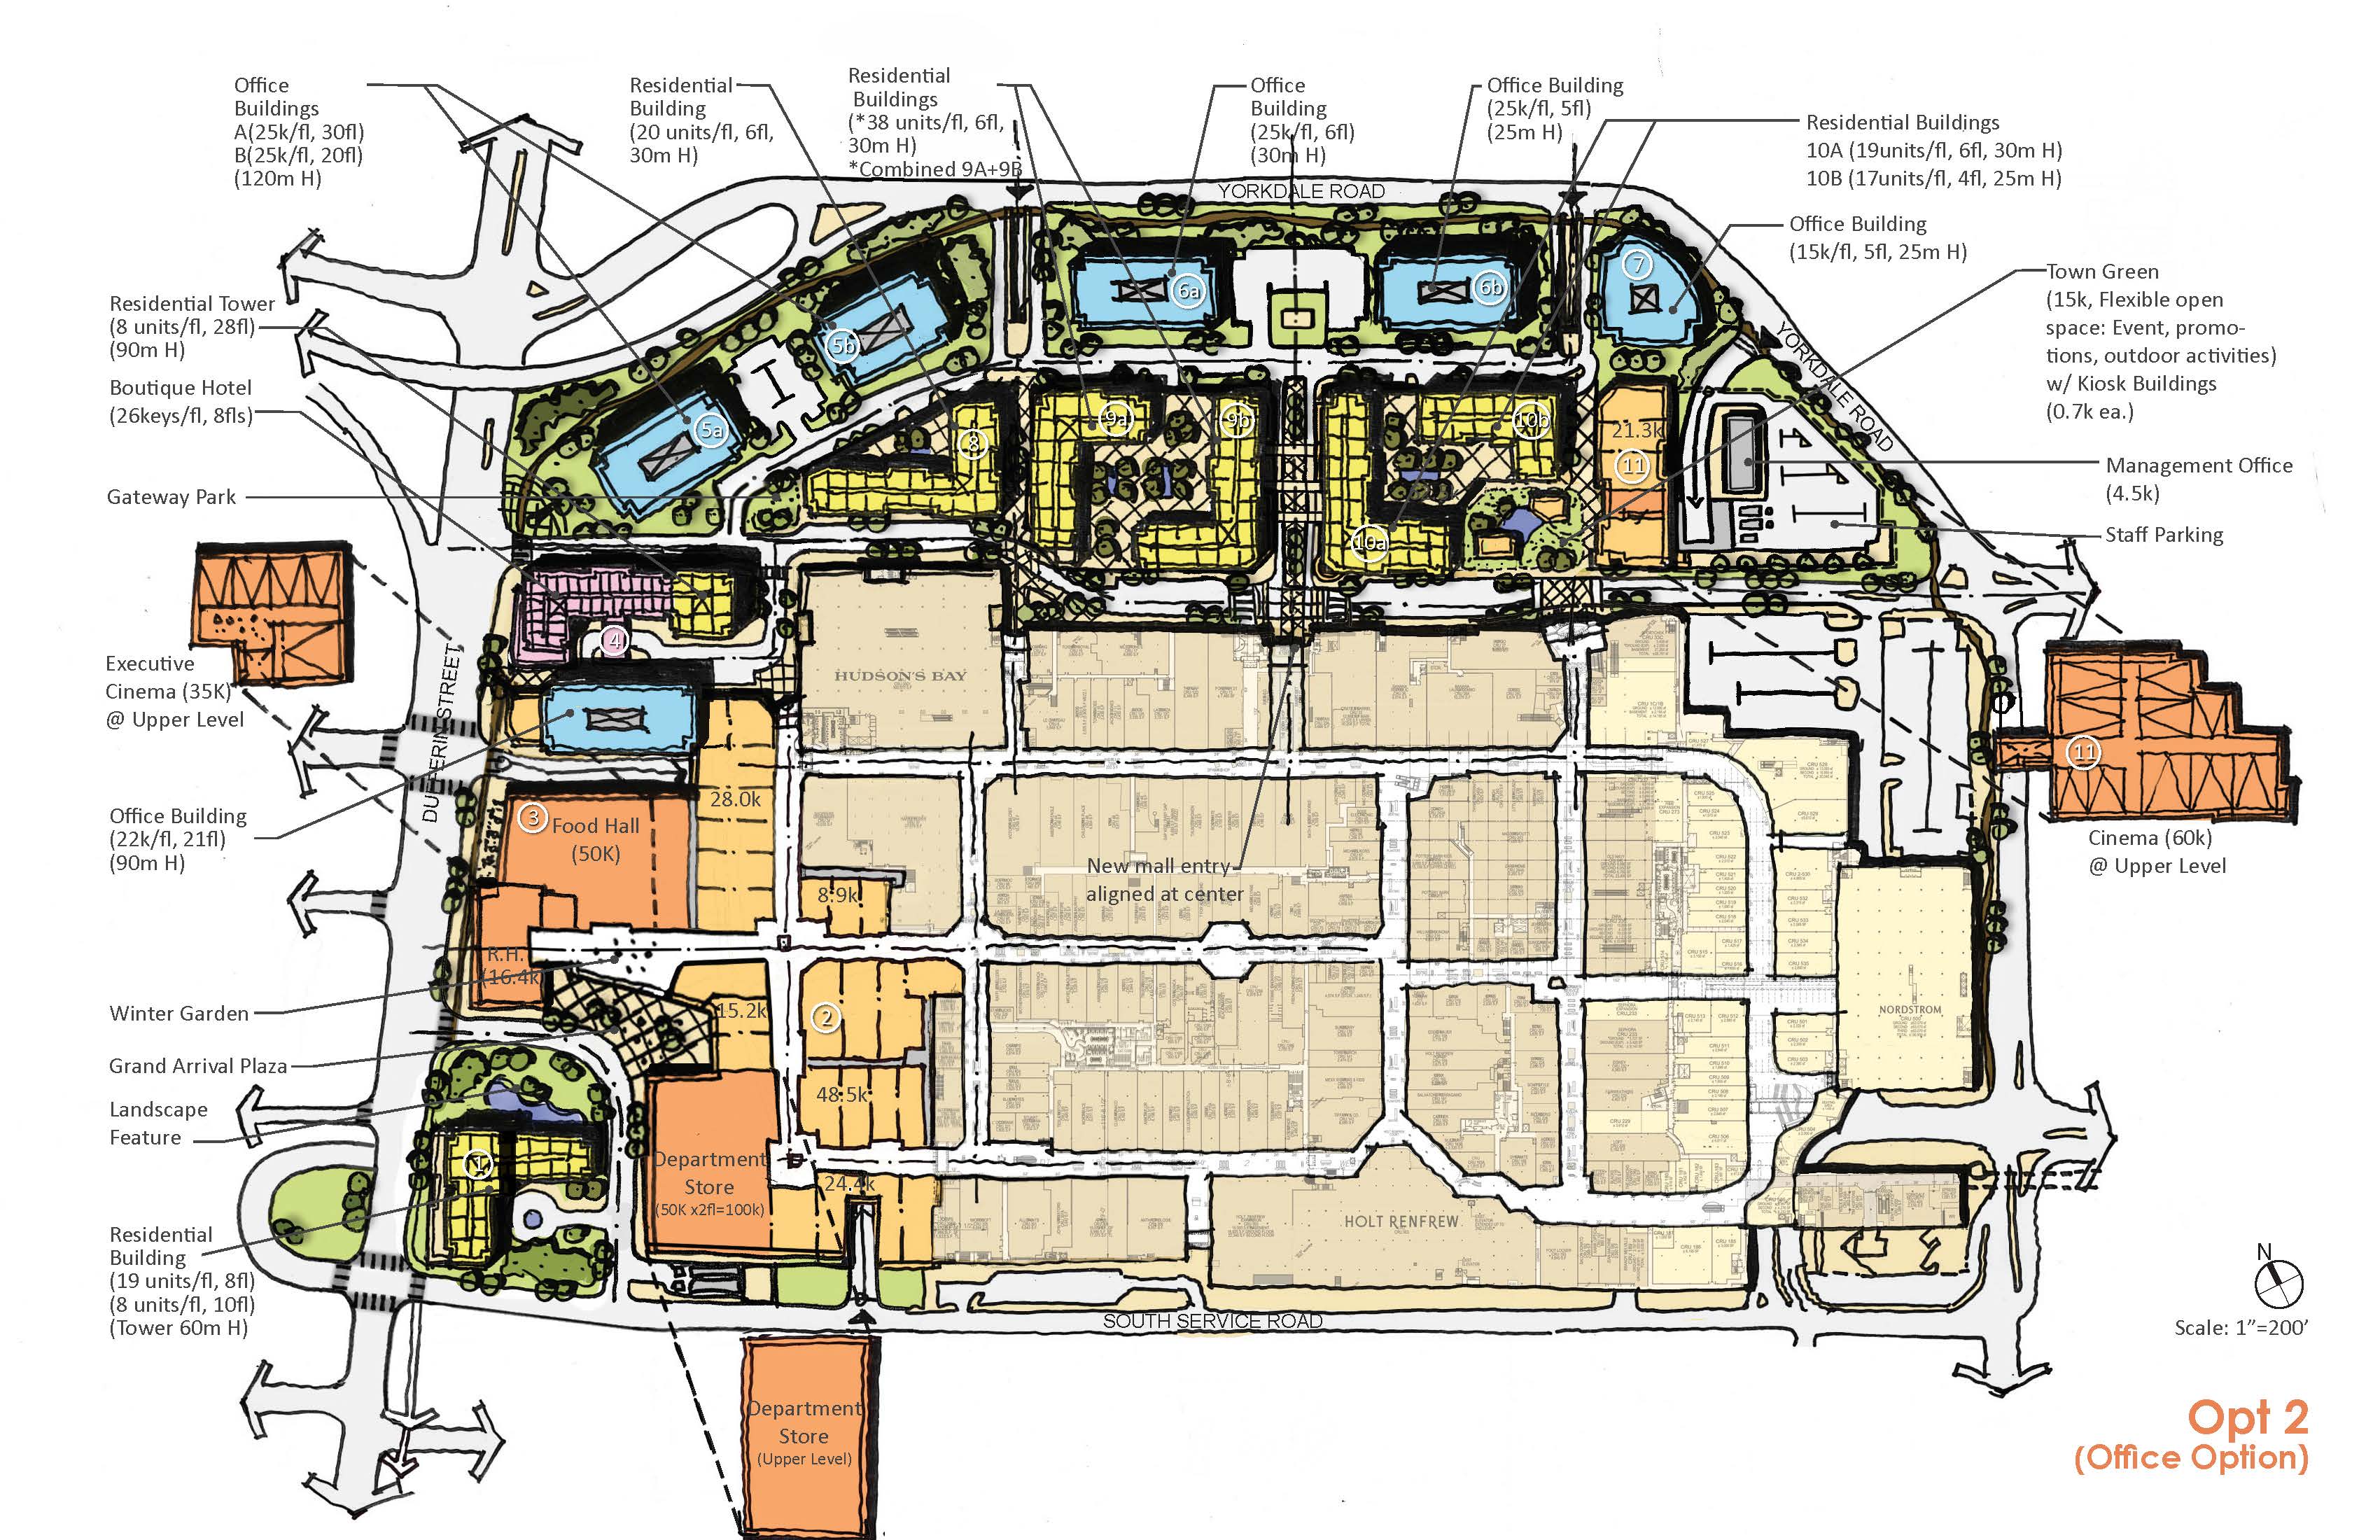 plan showing option two of the development proposal for Yorkdale Block, showing retail, hotel, office and residential spaces